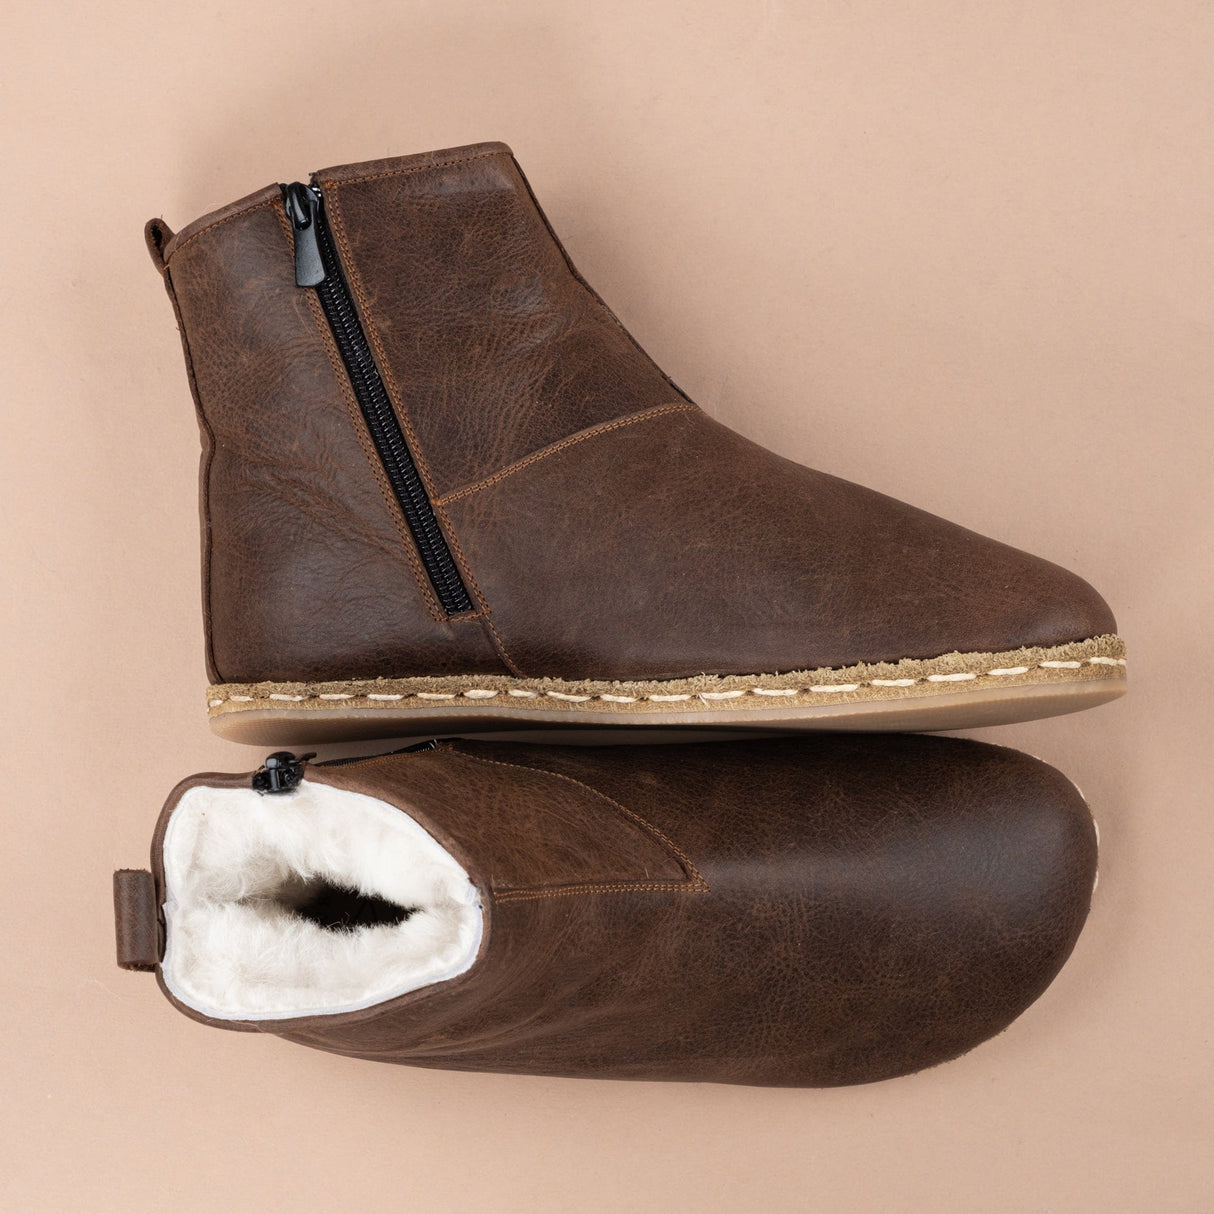 Men's Leather Coffee Barefoot Boots with Fur